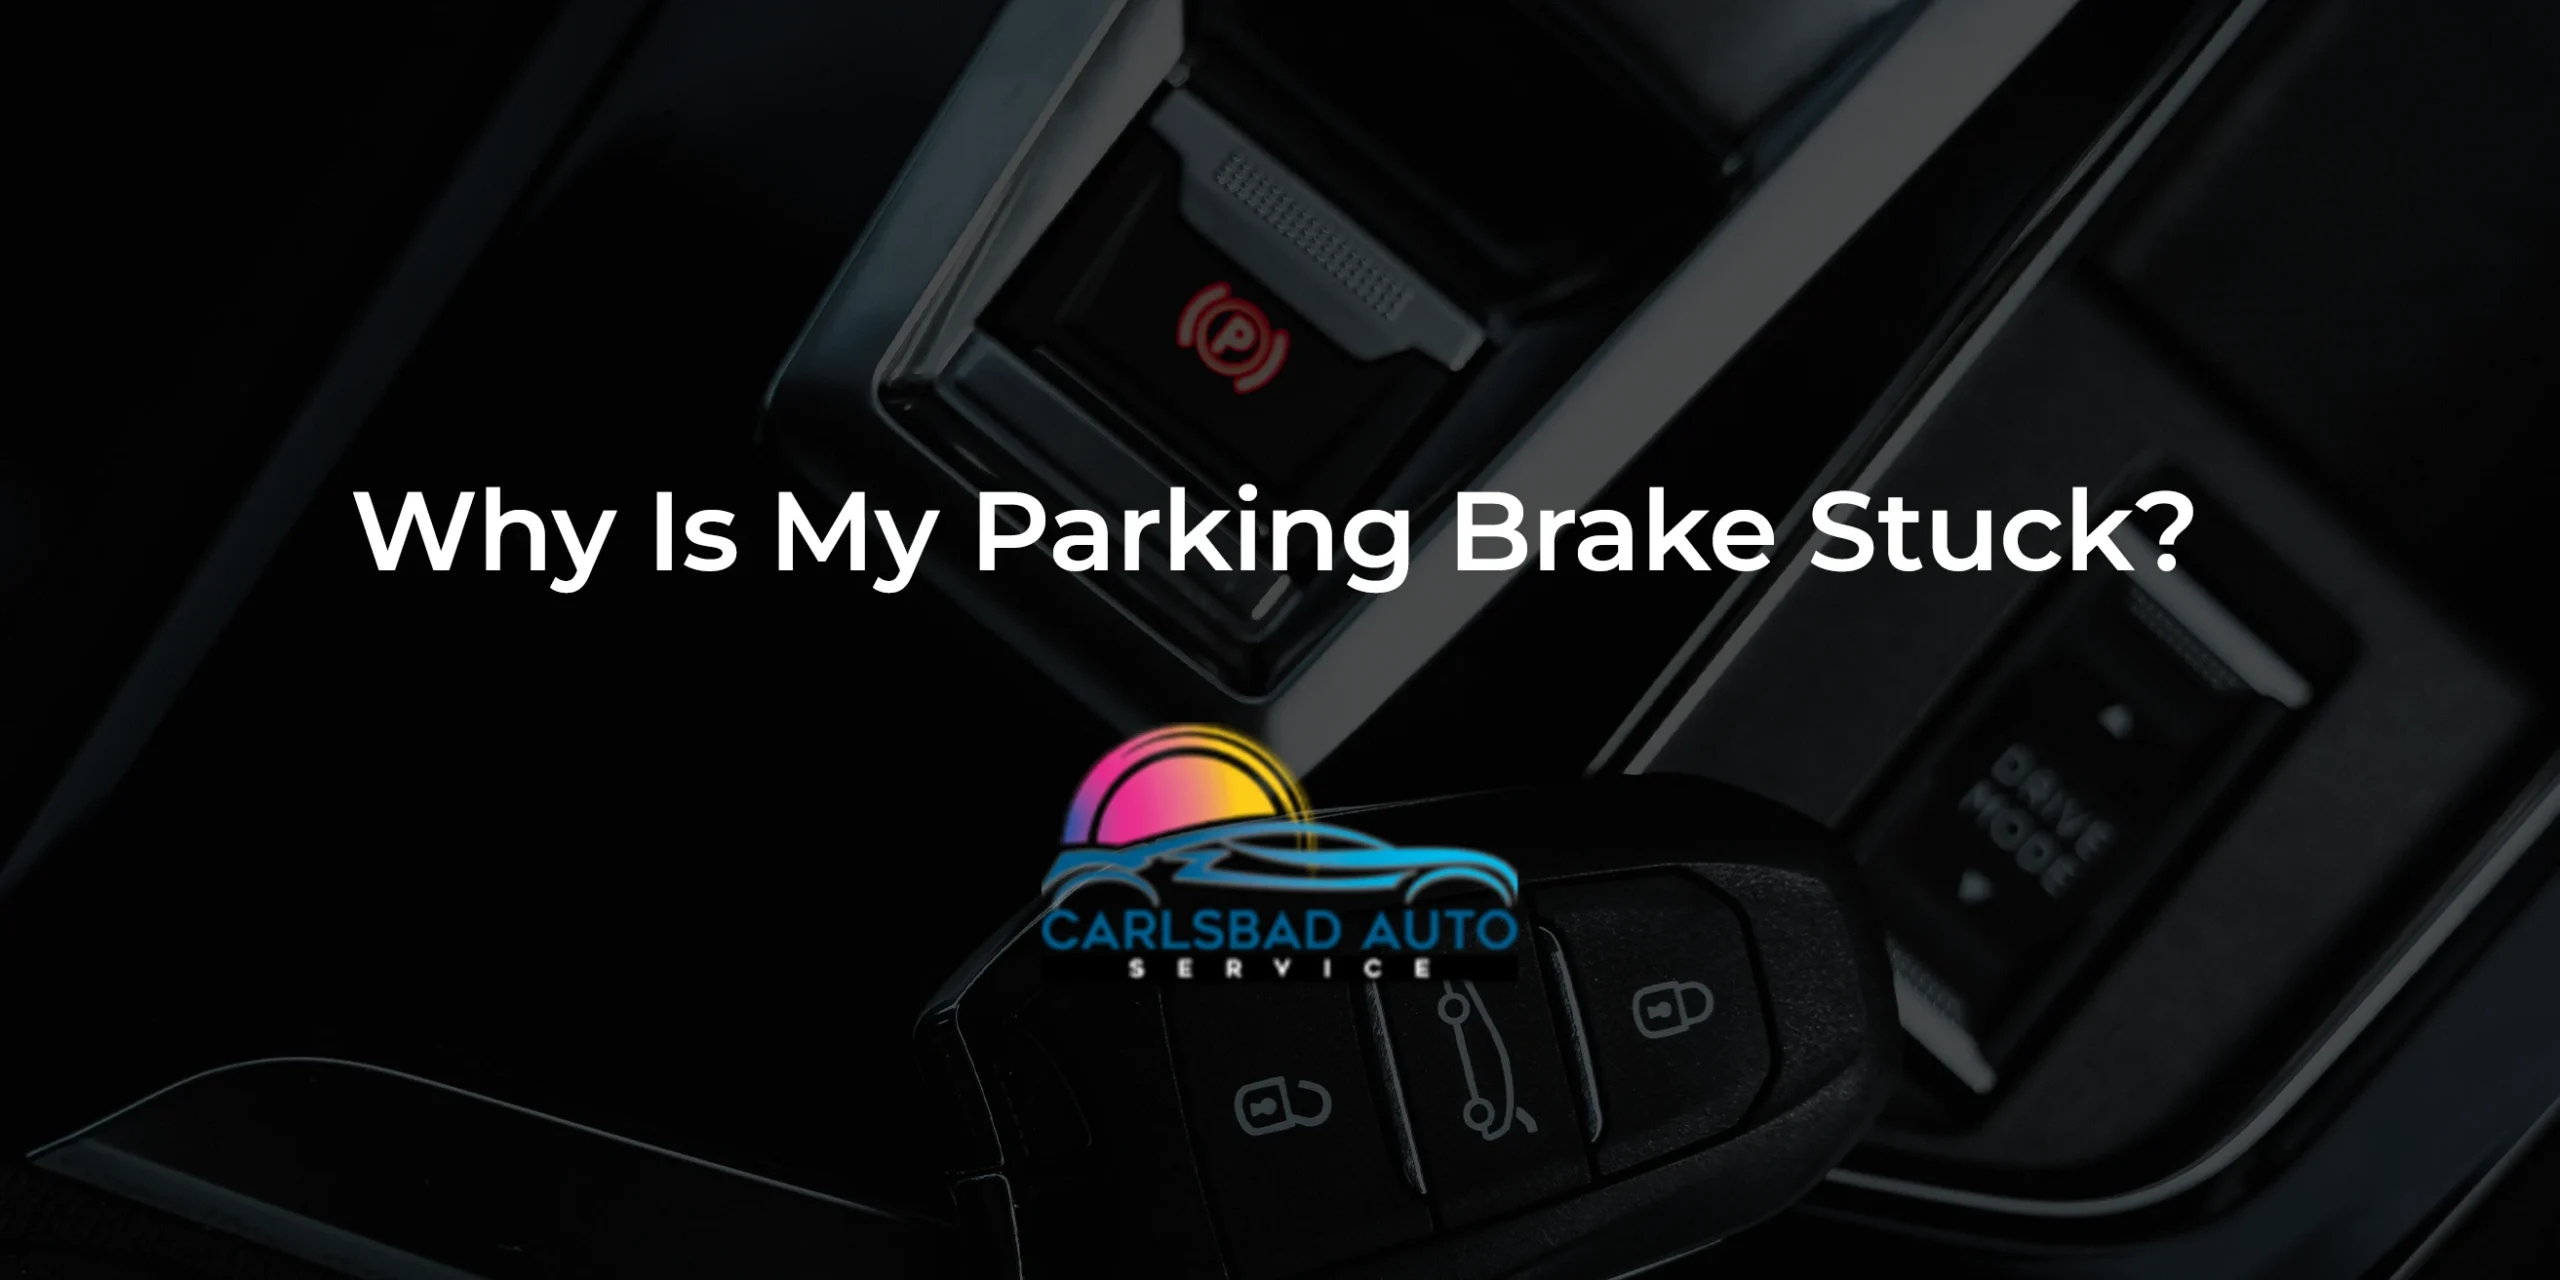 Why Is My Parking Brake Stuck?